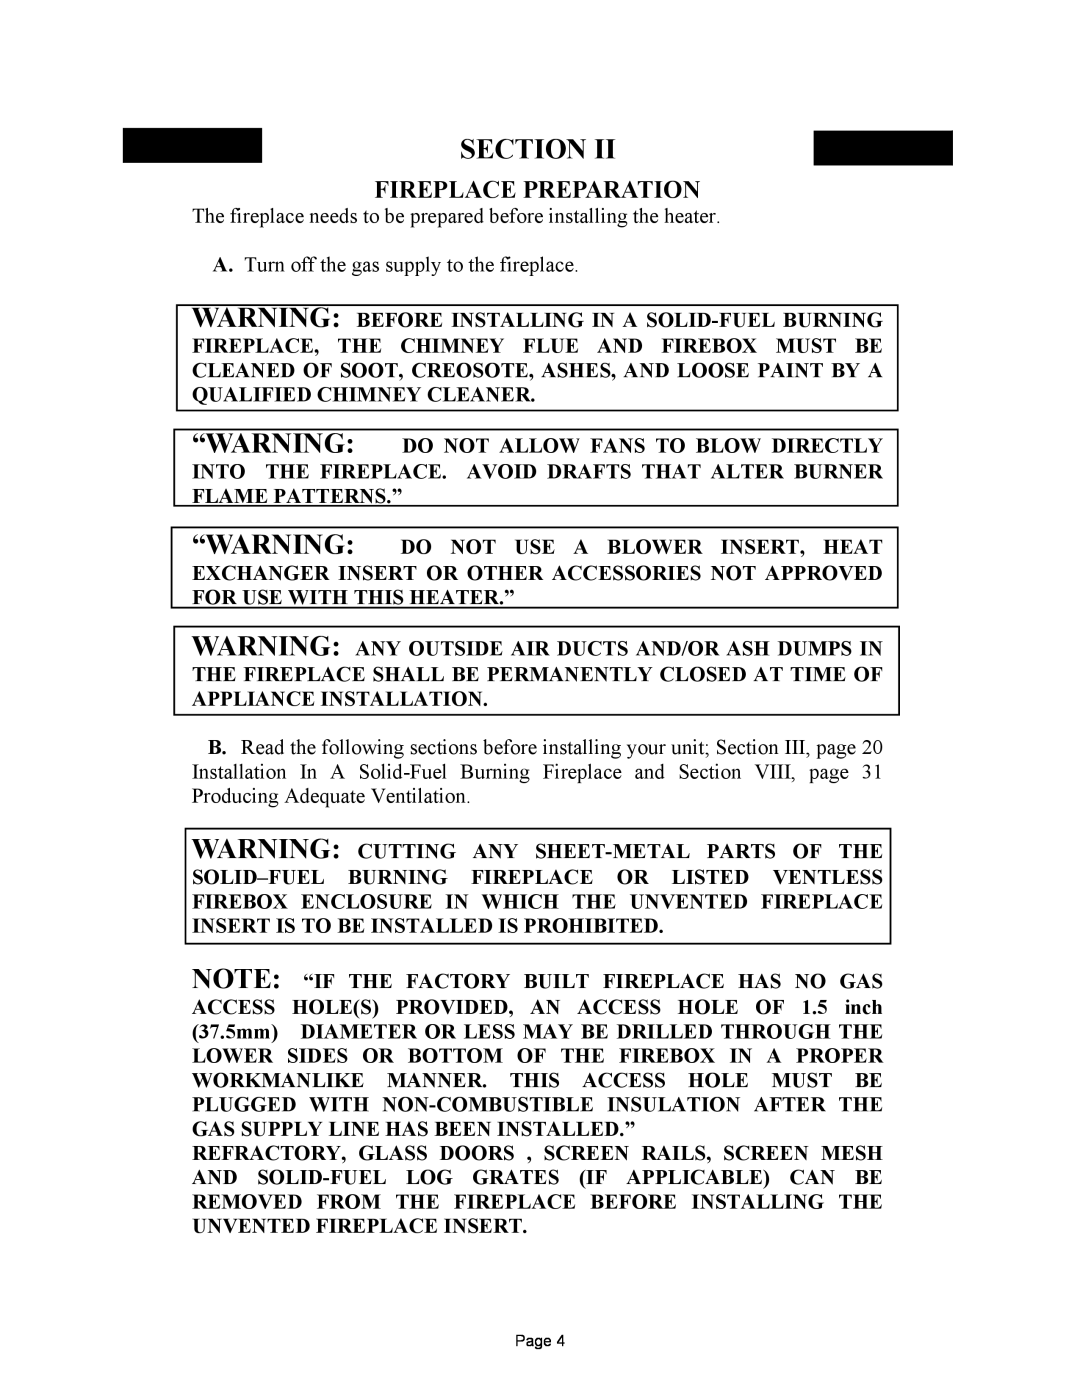 New Buck Corporation 384 manual Section, Fireplace Preparation 